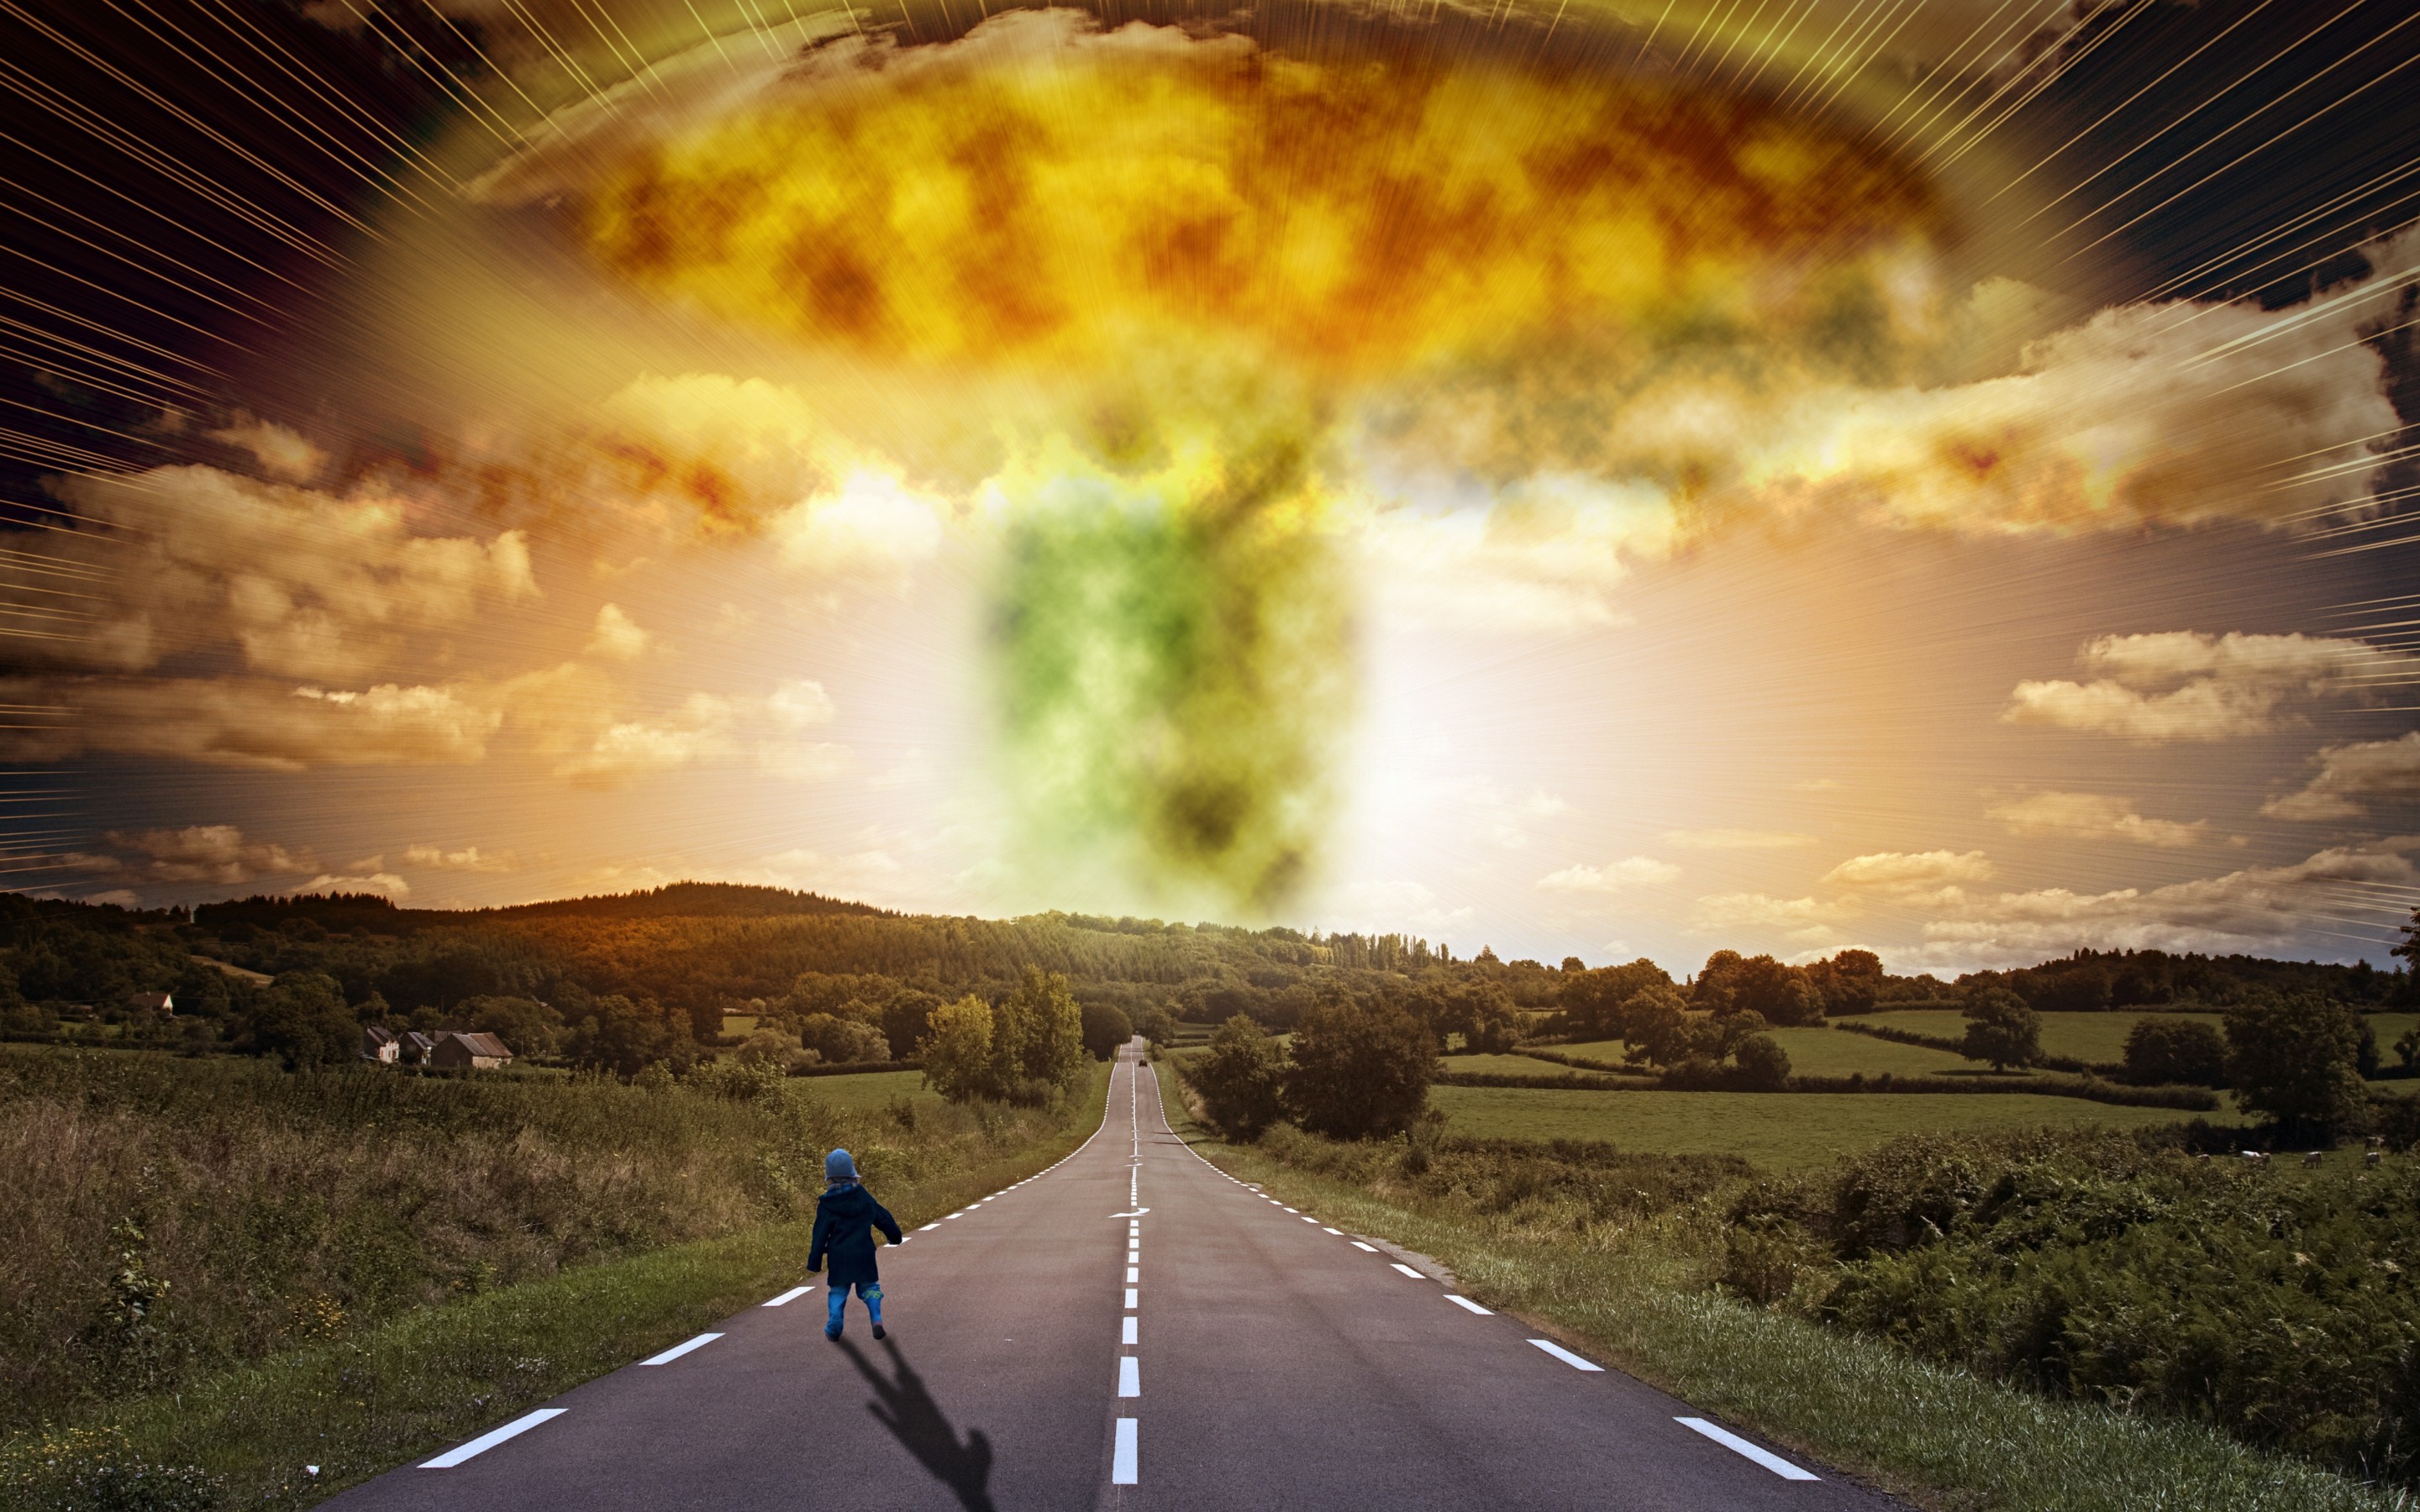 2880x1800 Road child explosion apocalypse signs houses trees apocalyptic nuclear  radiation bomb wallpaper |  | 126194 | WallpaperUP